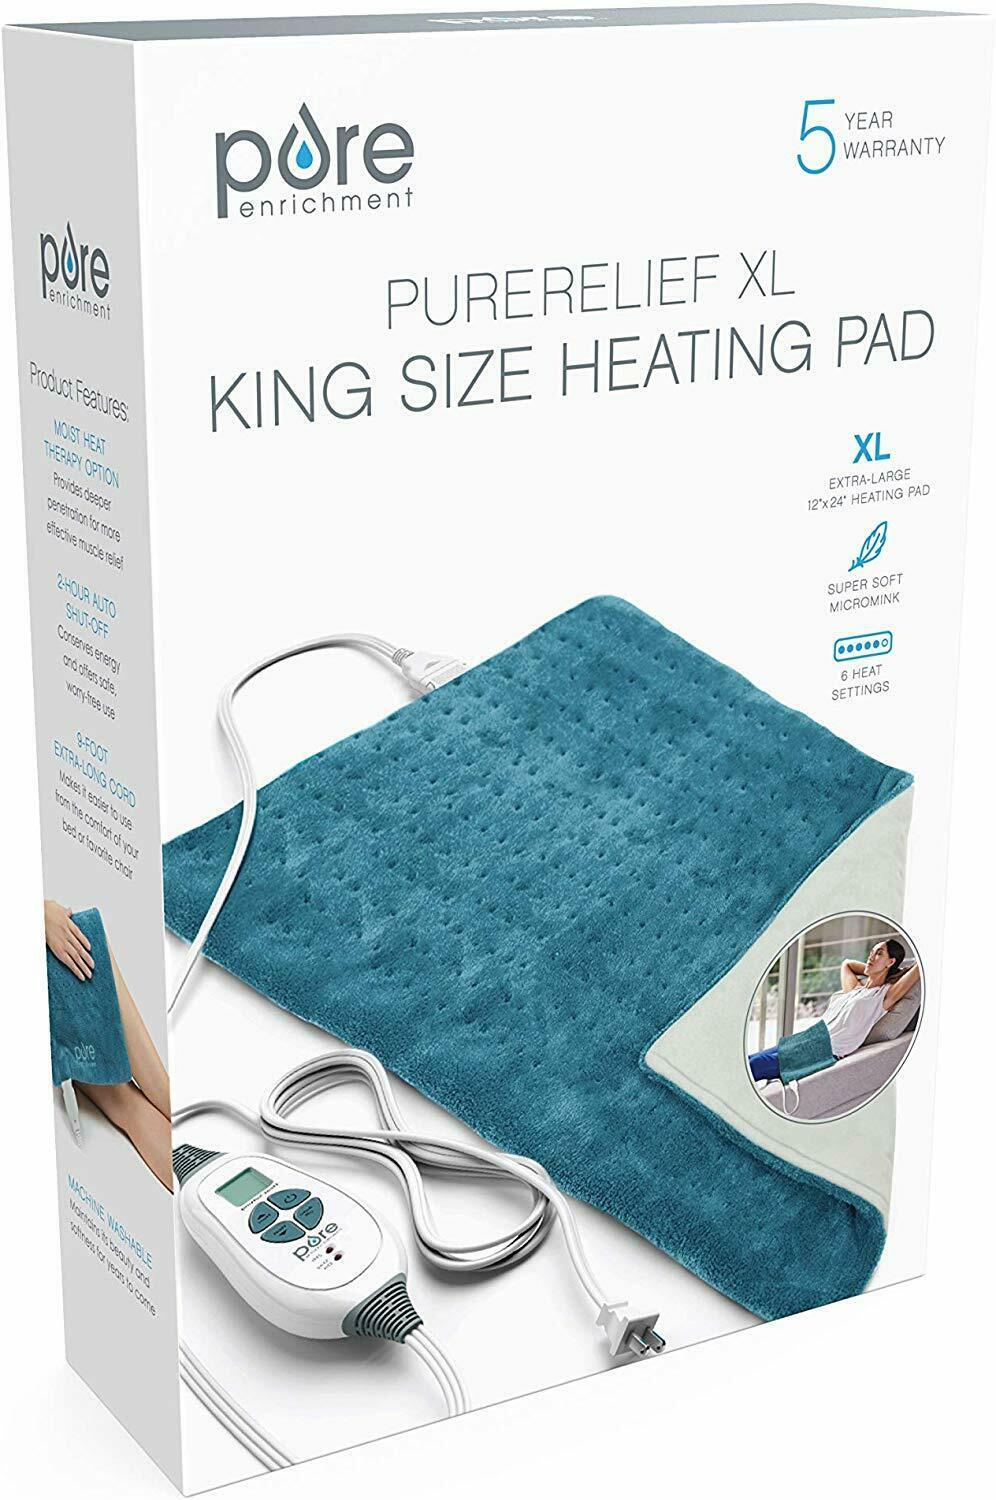 pure enrichment heating pad user manual